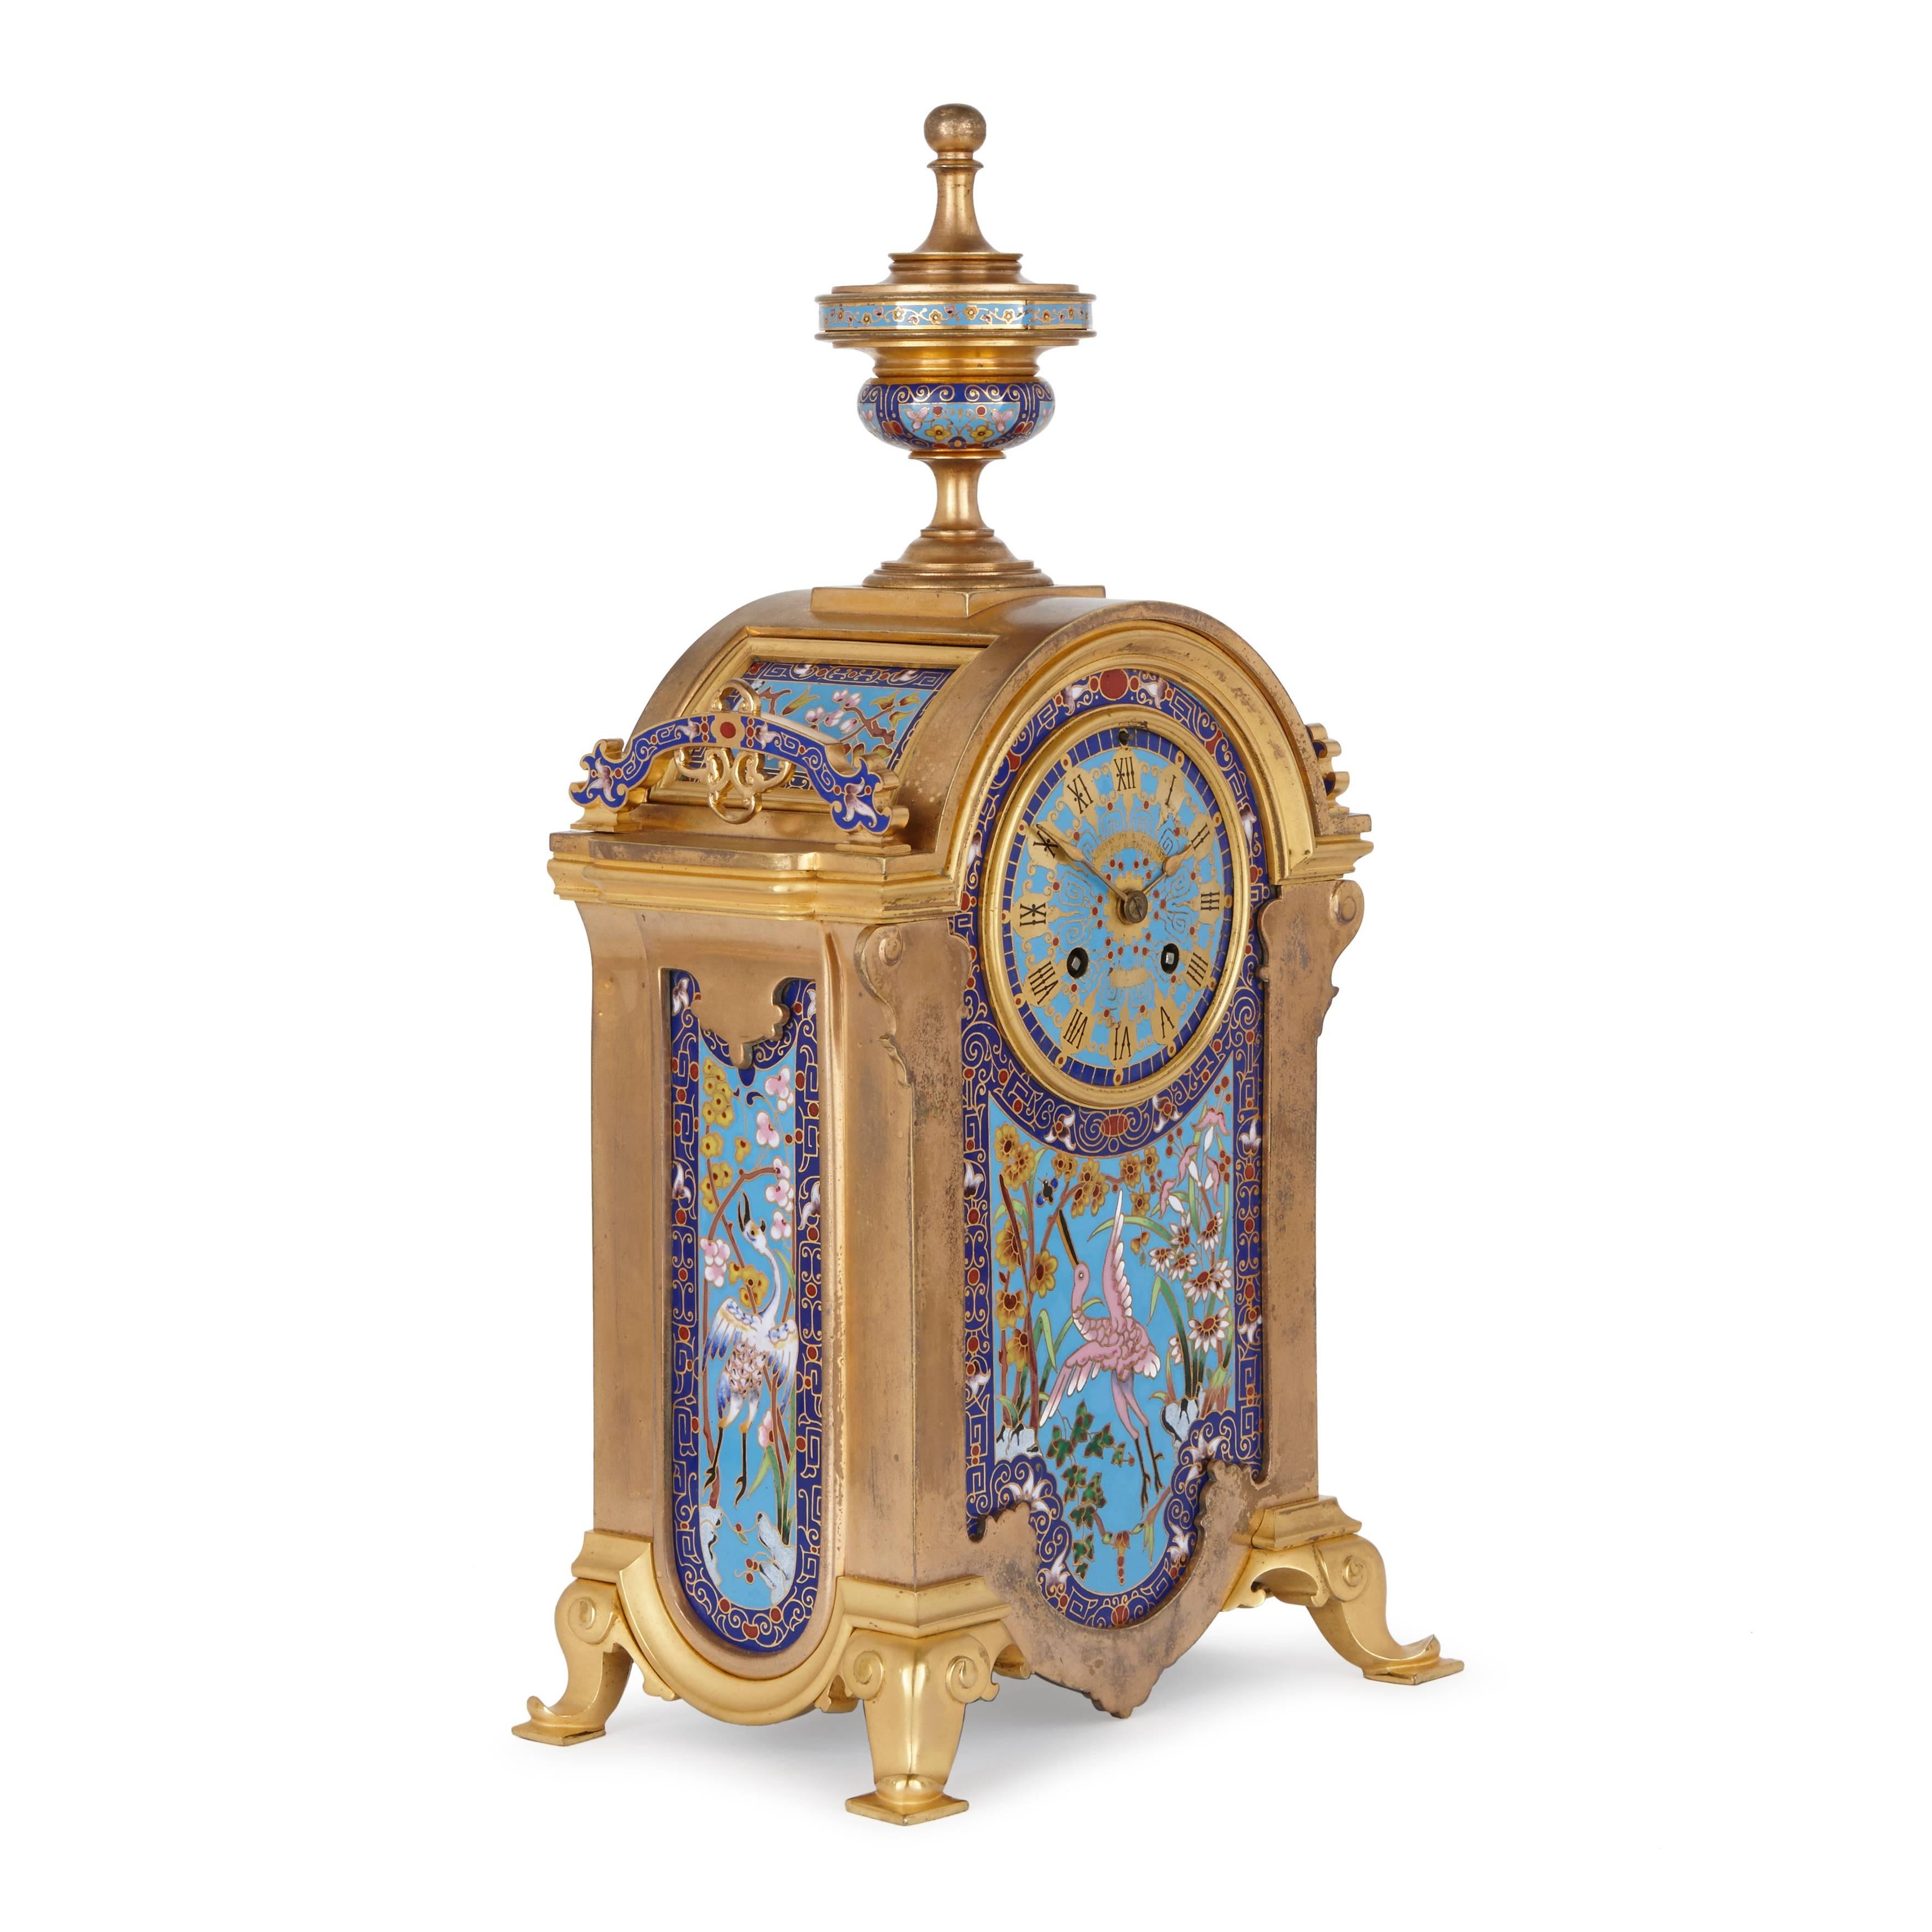 Comprising a central clock with two flanking vases, the case with central and side panels decorated with flowers and herons, the two vases similarly decorated.

Height, width and depth as follows:
Clock: 44 x 23 x 16 cm.
Vases: 33 x 11 x 10 cm.

The